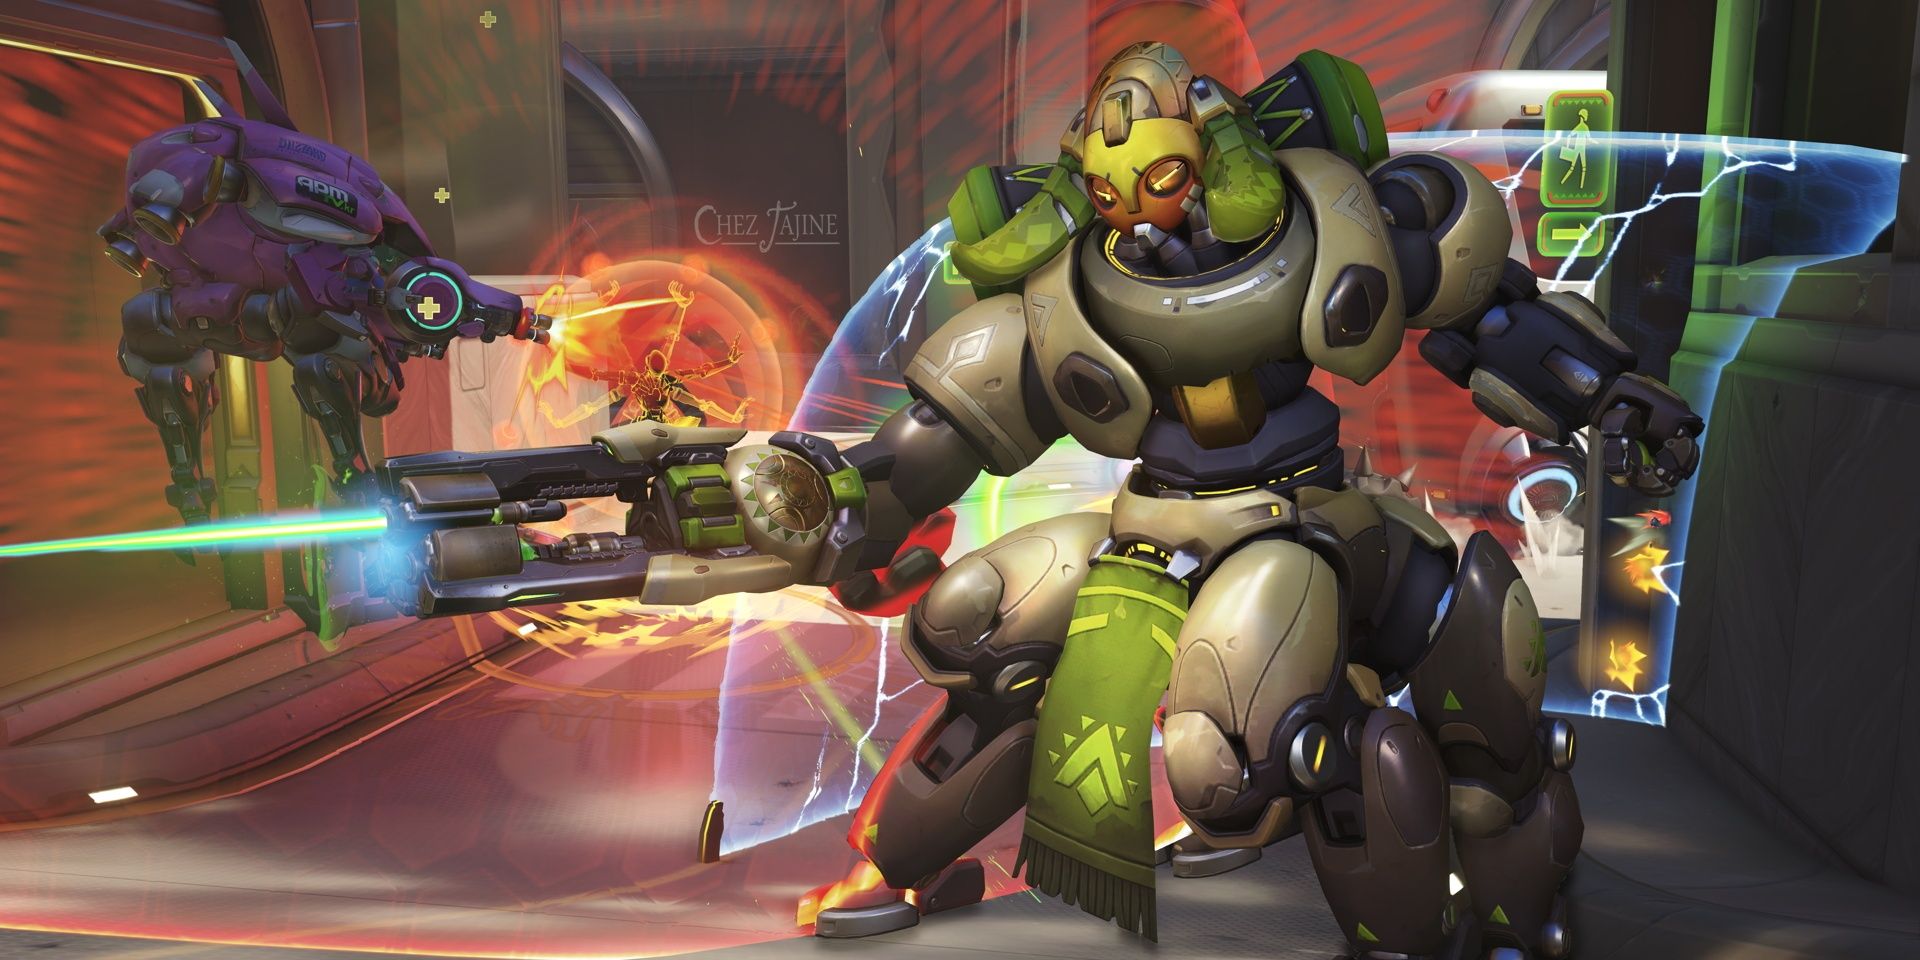 Orisa protects her team as Zenyatta uses tranquillity 